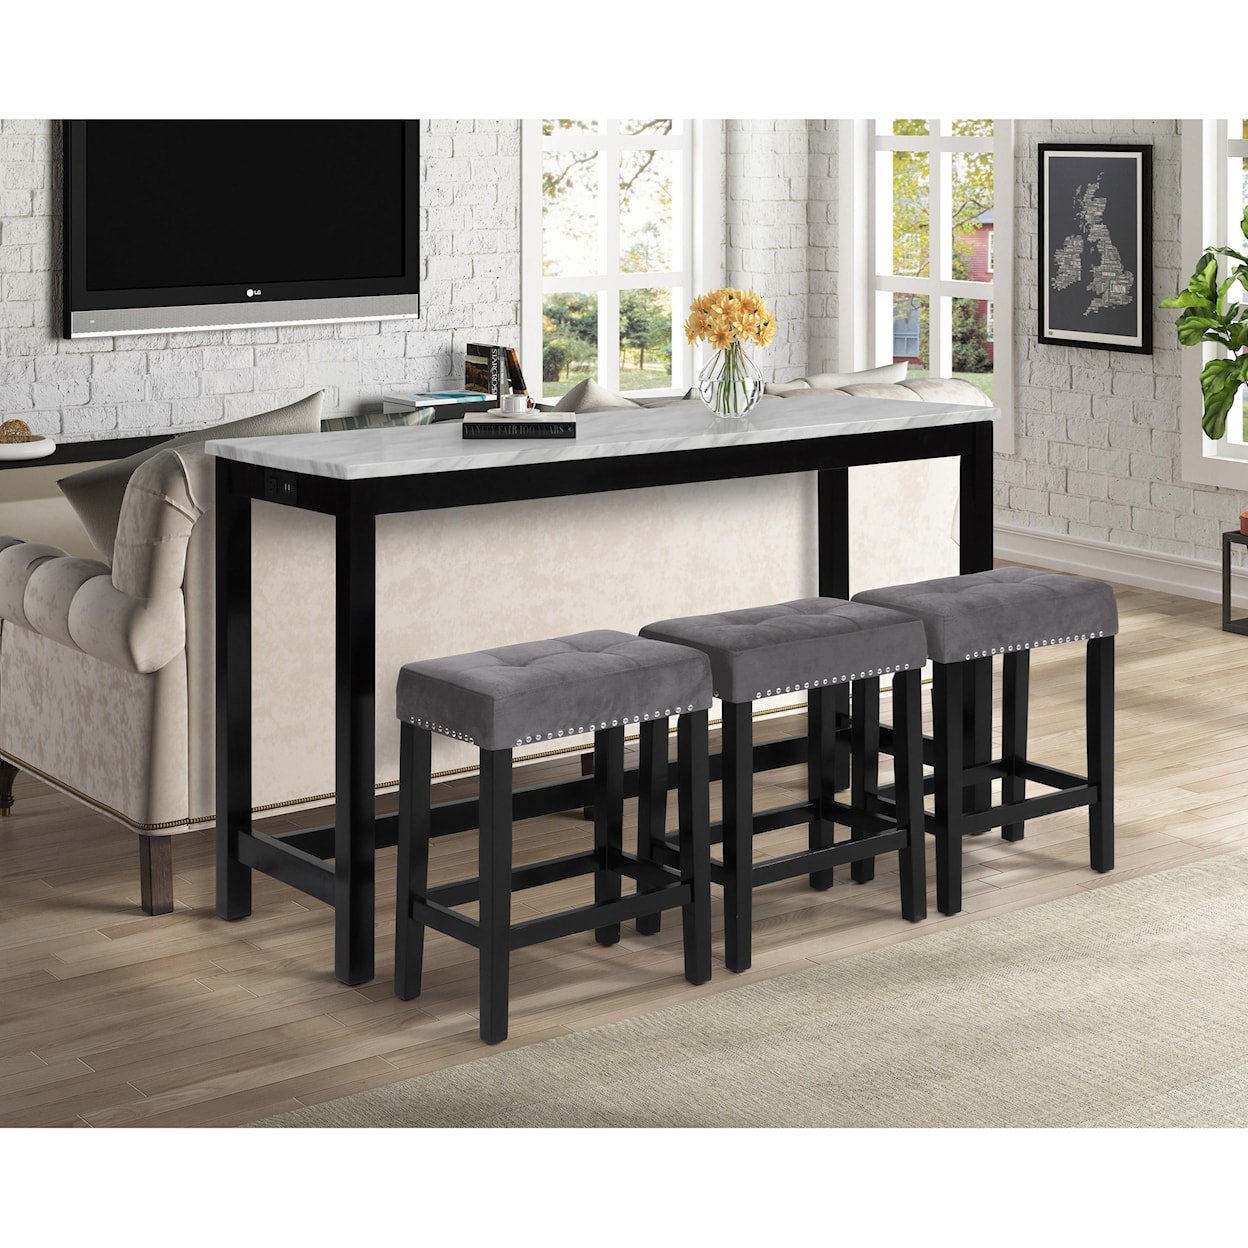 New Classic Celeste Theater Bar Table W/ 3 Stools